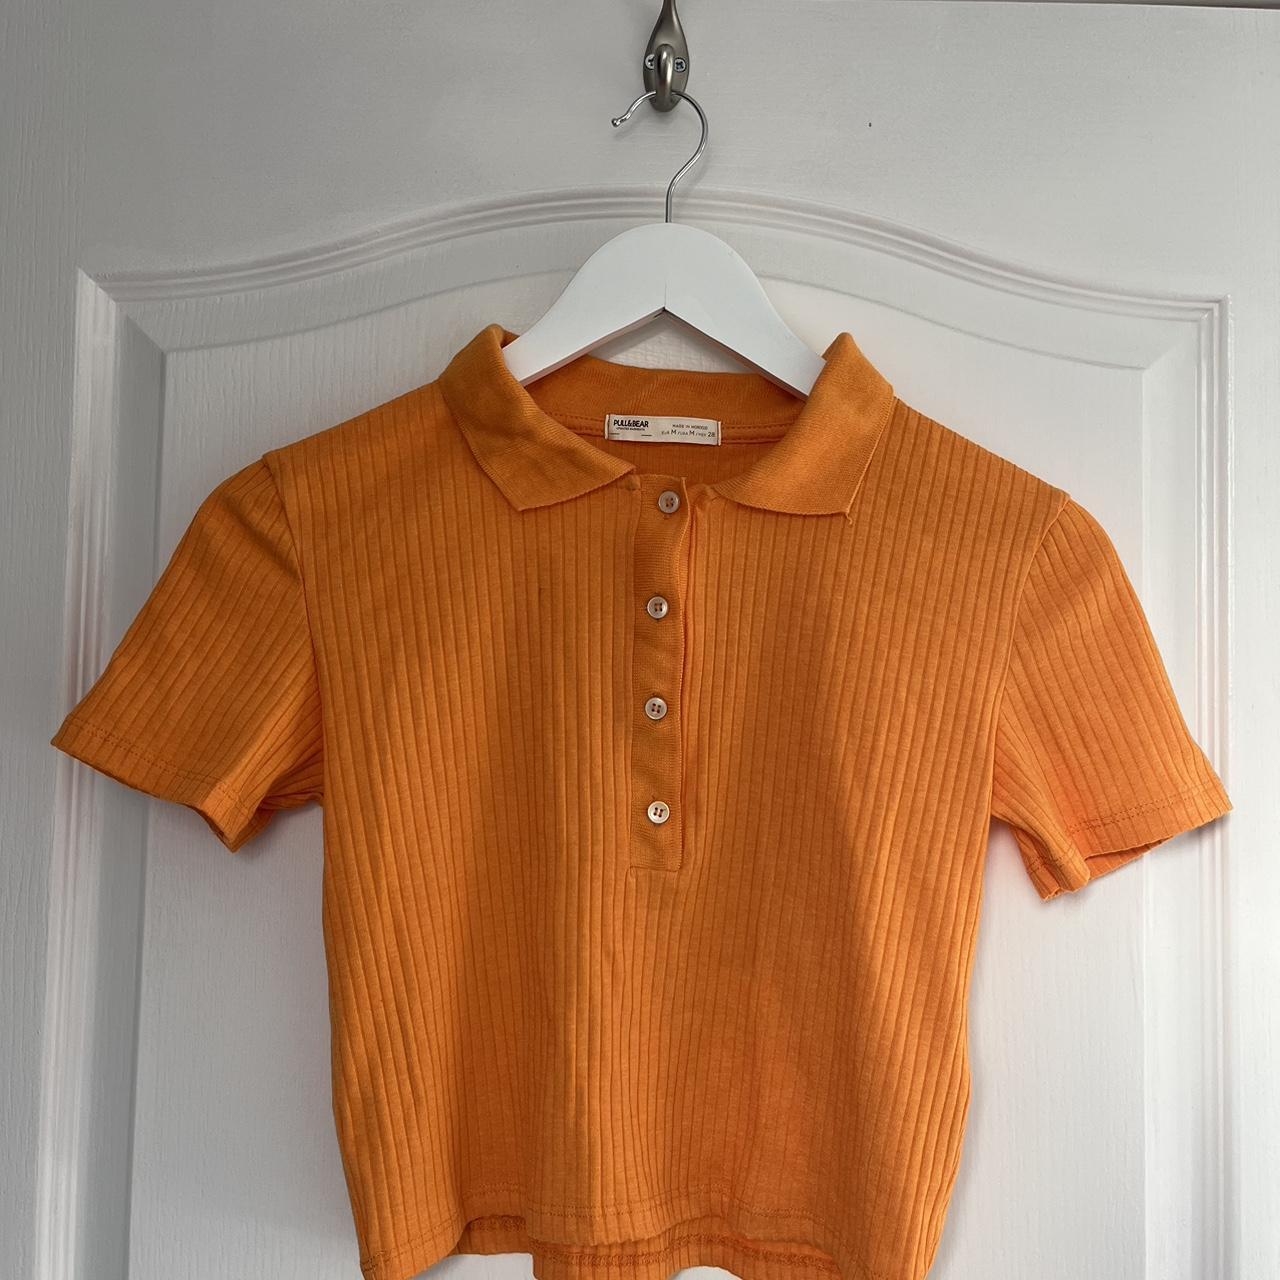 Pull and Bear polo top, no label but never worn - Depop